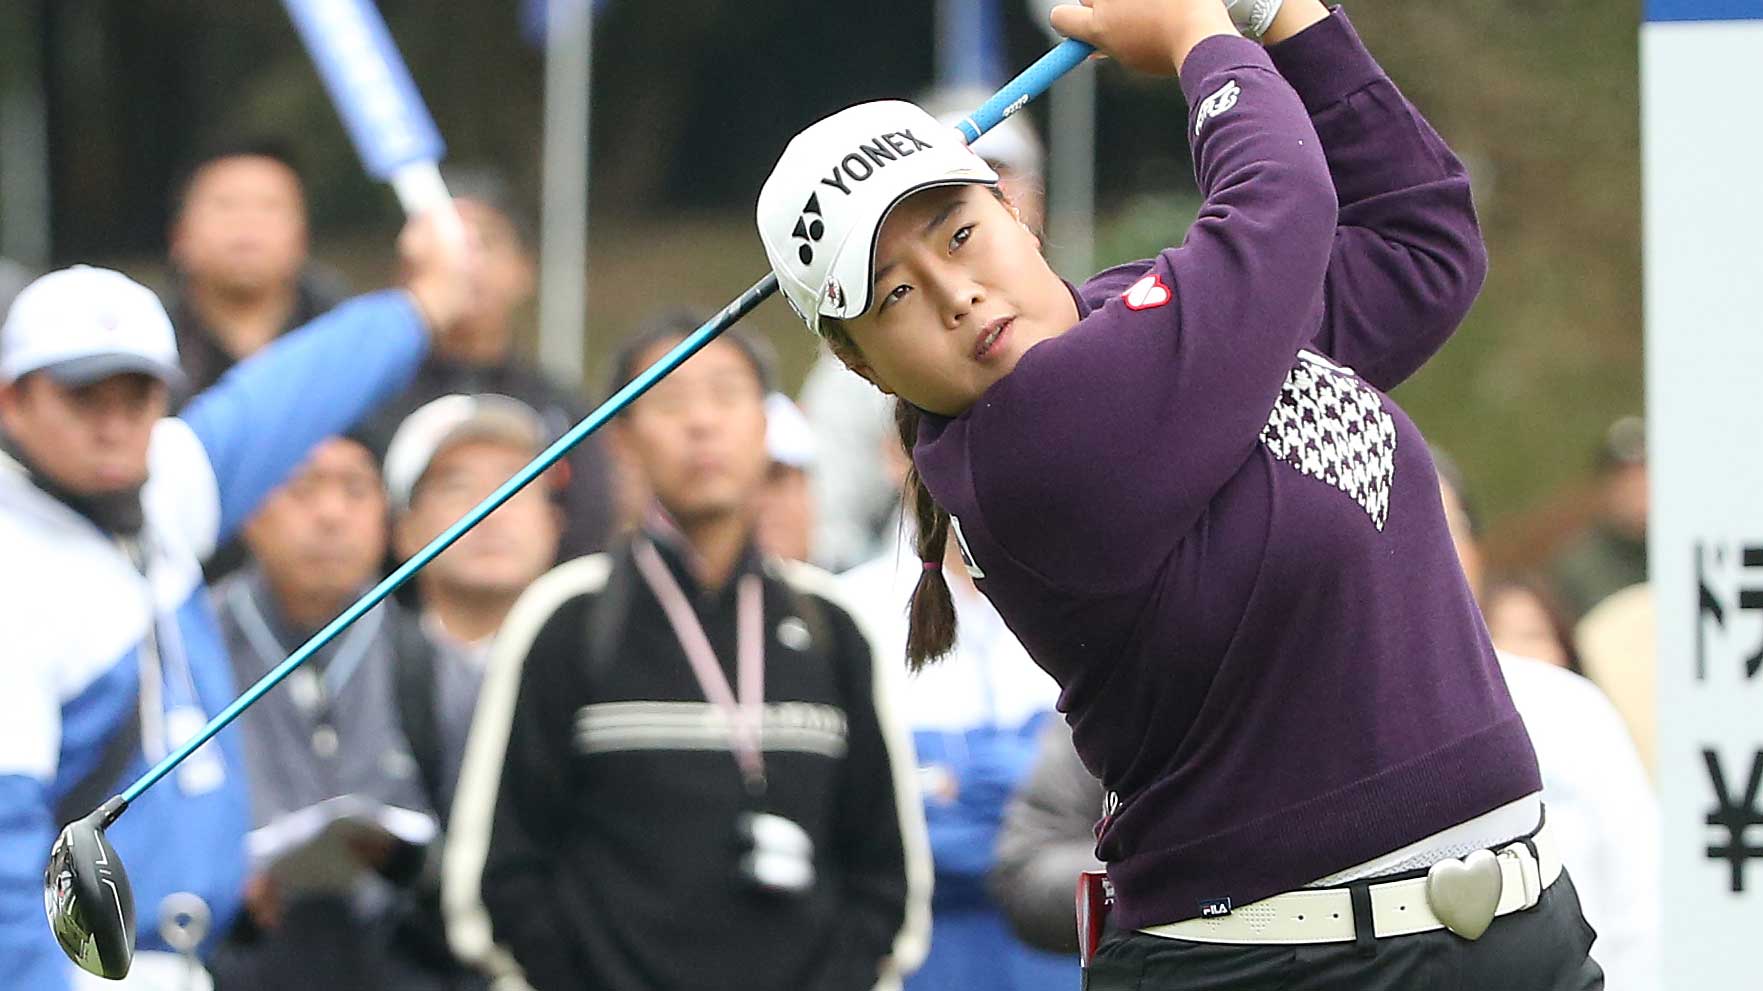 Sun-Ju Ahn of South Korea hits her tee shot on the 1st hole during the second round of the TOTO Japan Classic